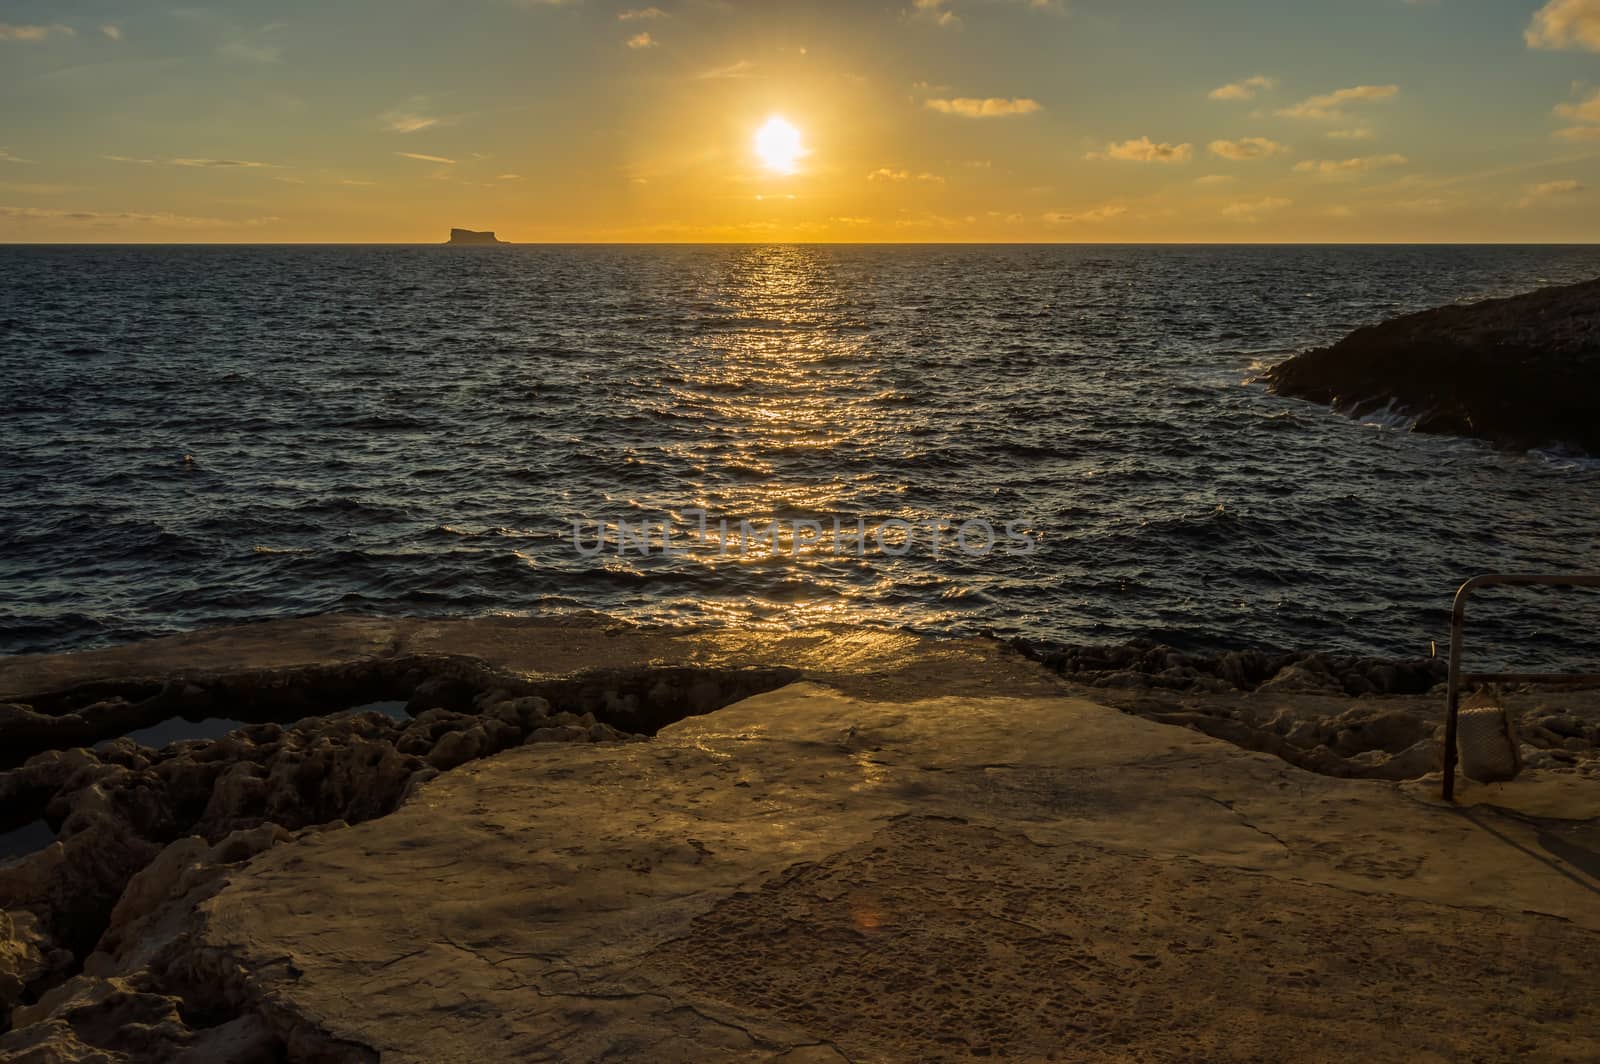 Sunset over the Mediterranean Sea viewed from the Island of Malta